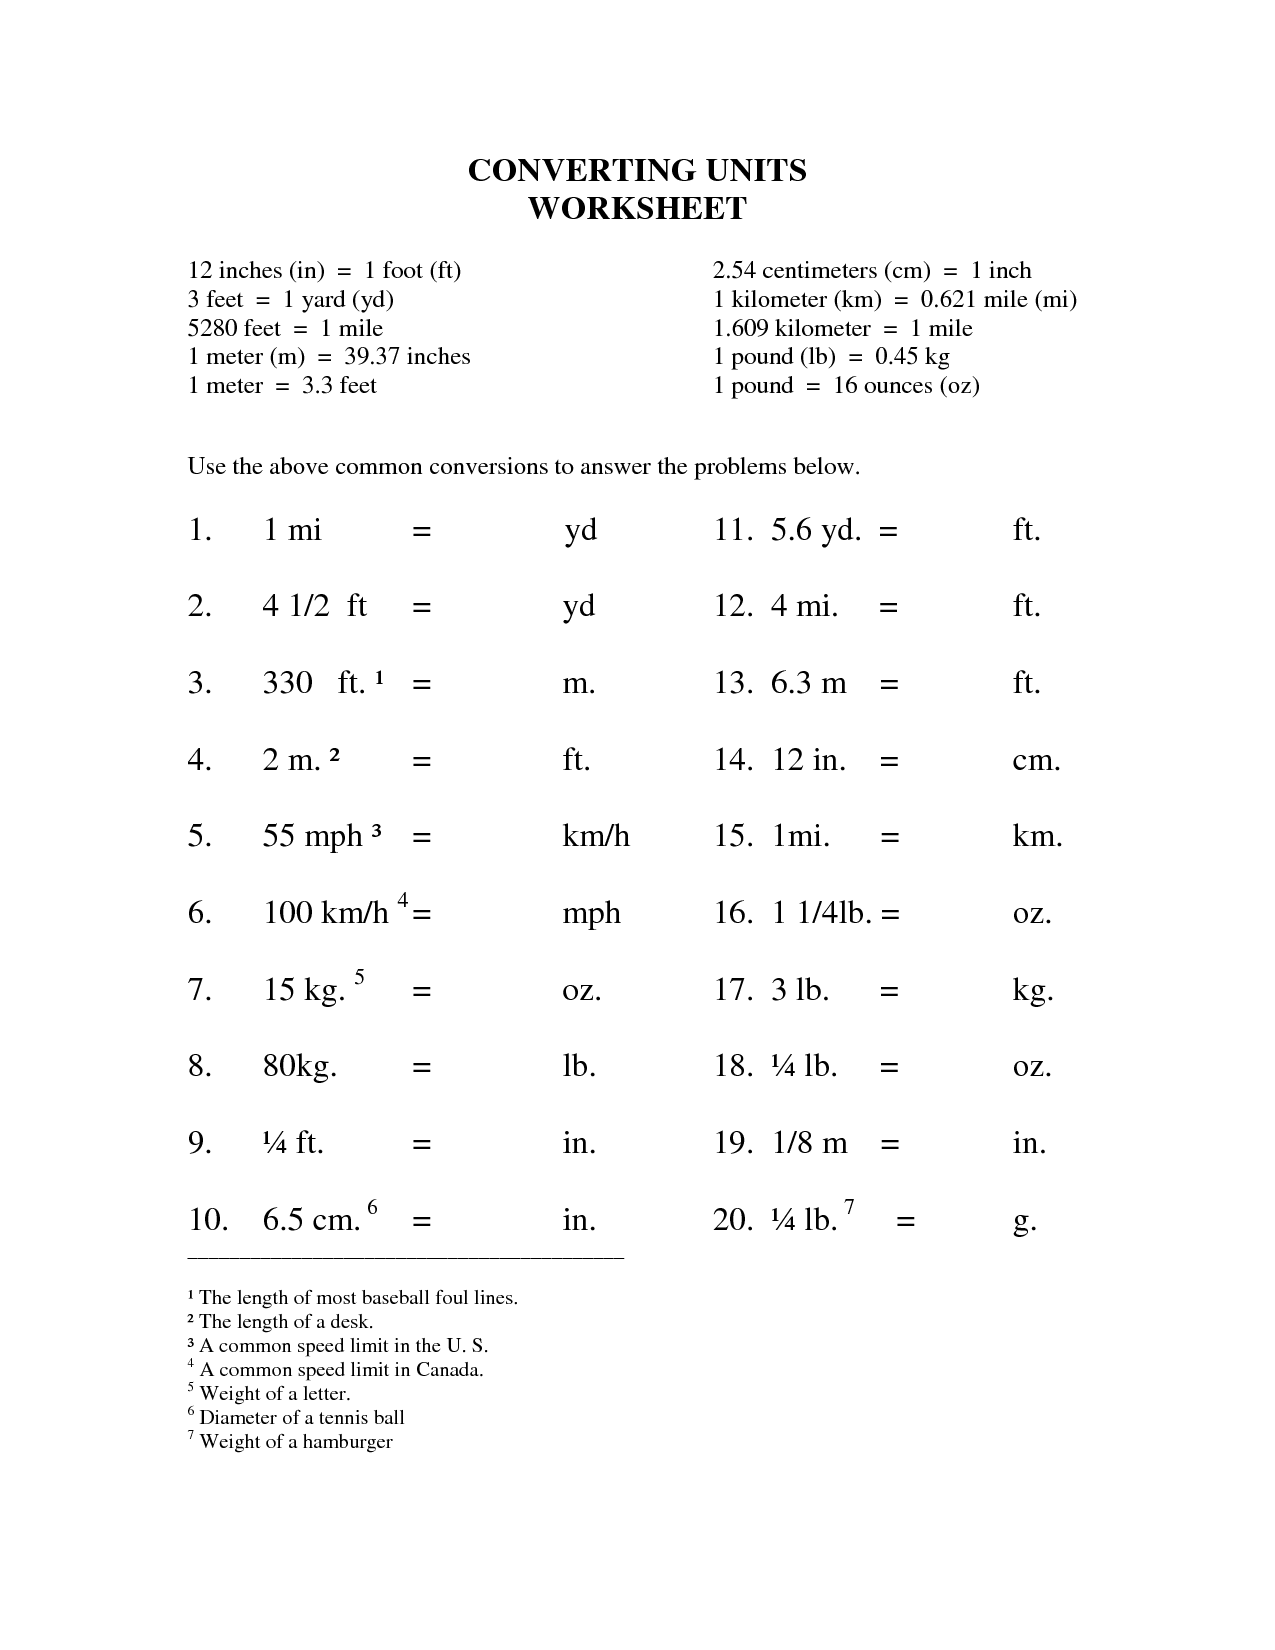 Inches Feet Yards Conversion Worksheet Image